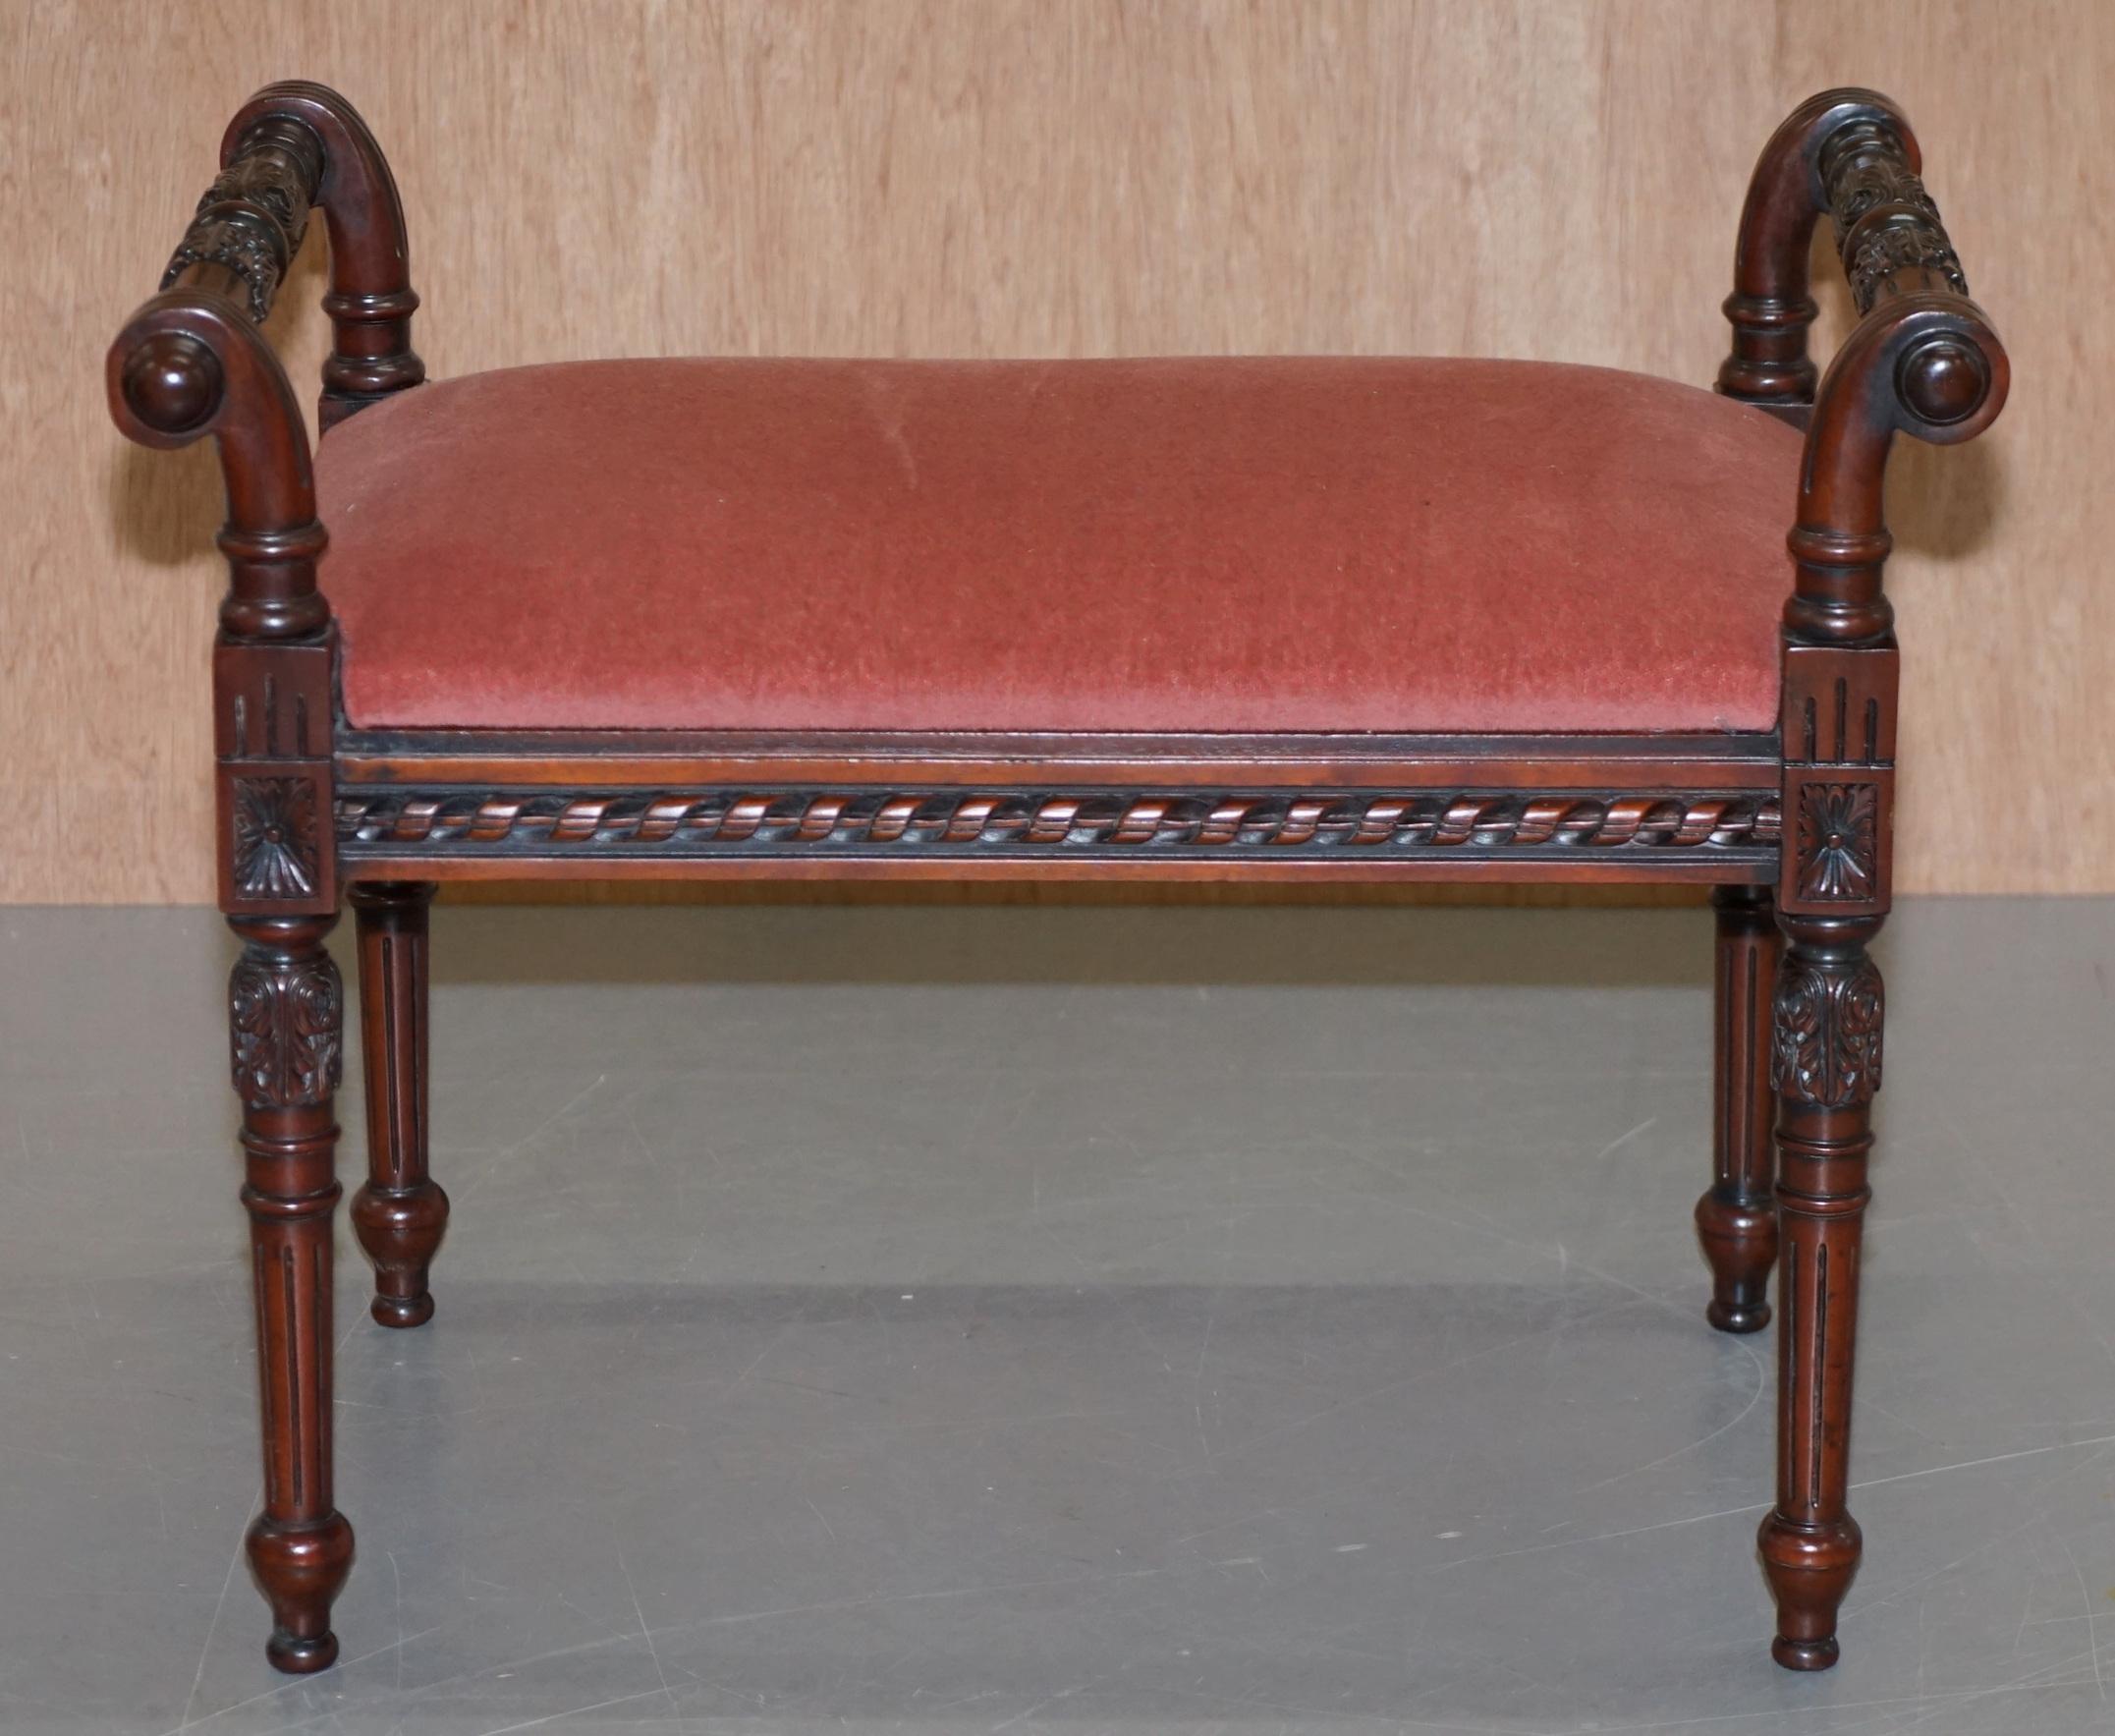 We are delighted to this stunning ornately carved piano or dressing table stool

A very good looking and well-made piece, expertly carved and very decorative. Ideally suited as a dressing table or piano stool but naturally it can be used for